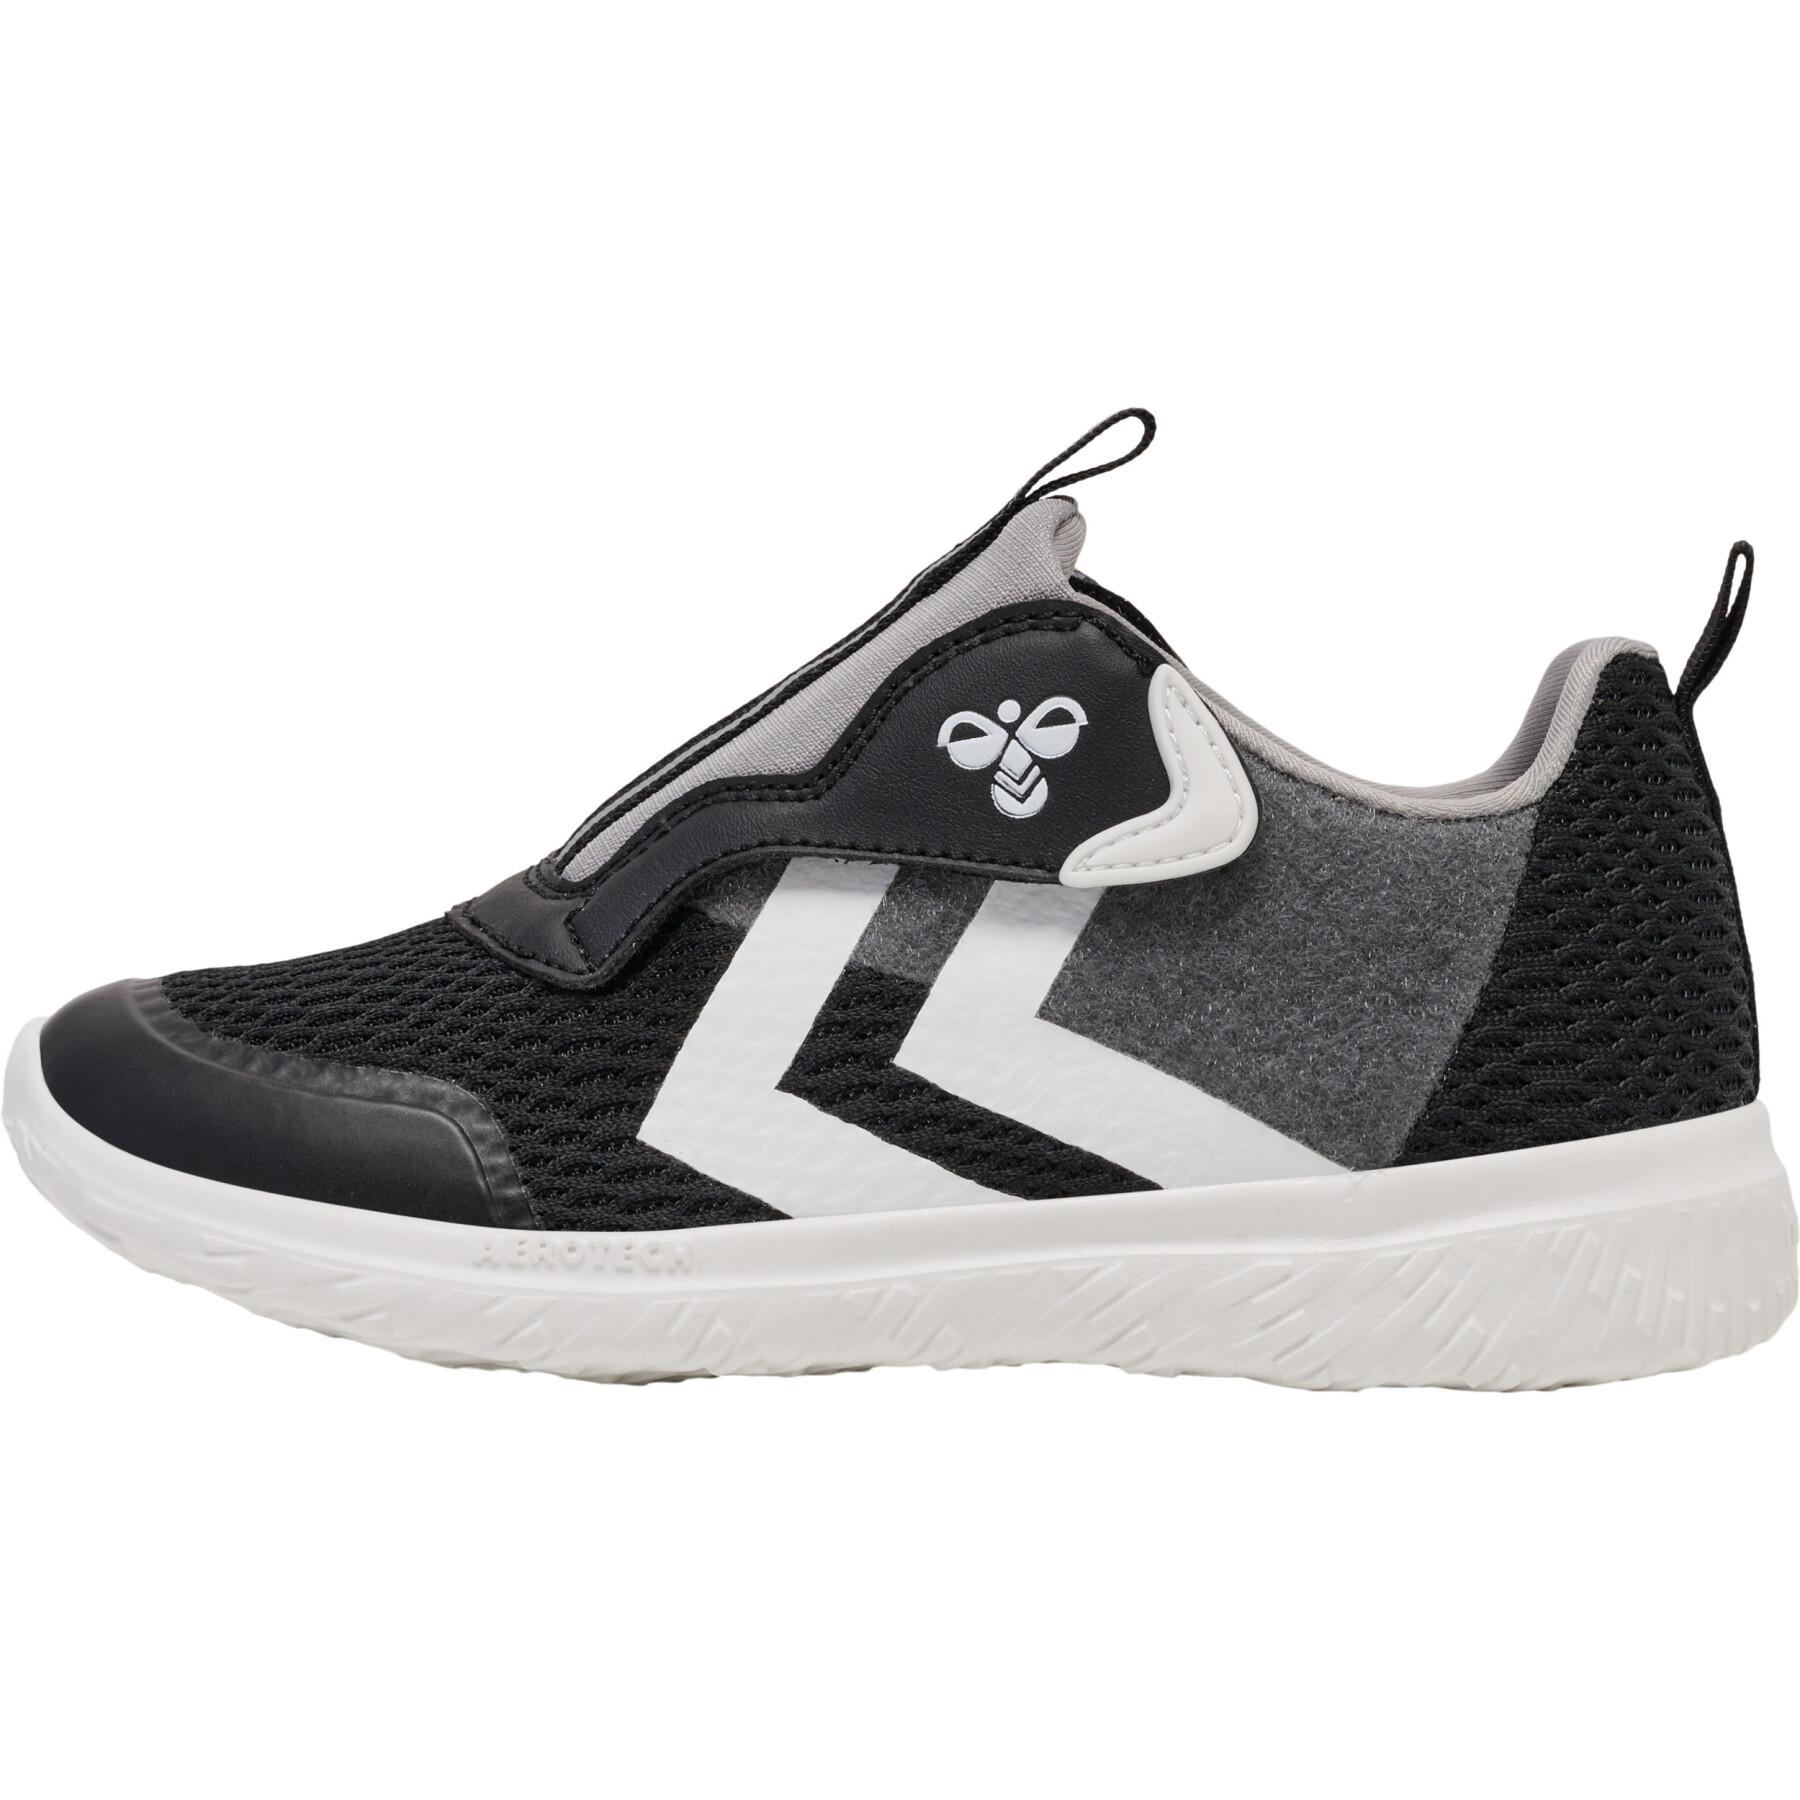 Children's sneakers Hummel Actus Super Fit Recycled